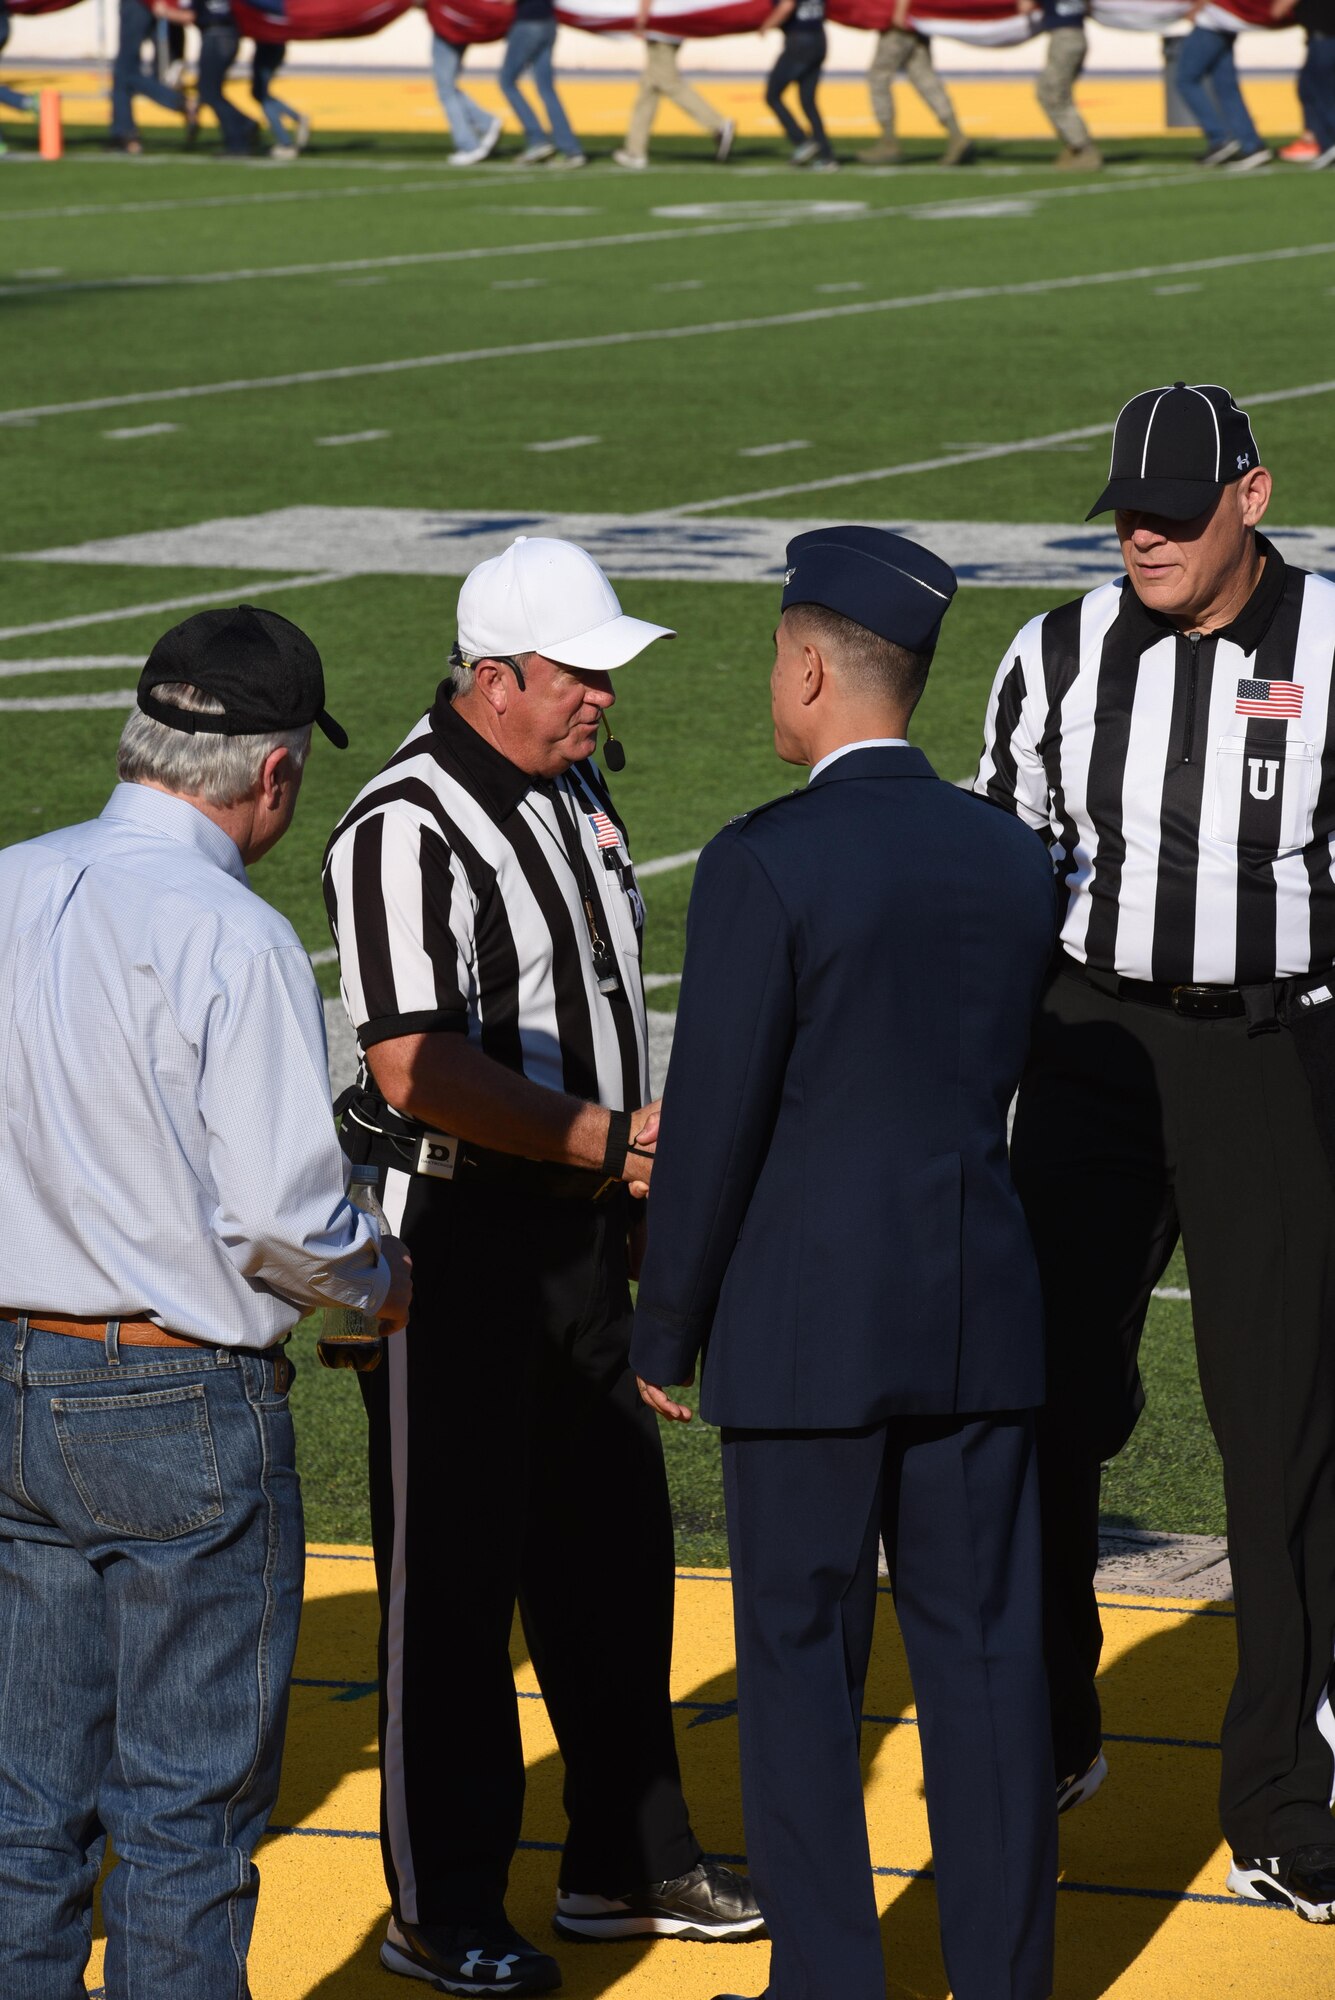 U.S Air Force Col. Ricky Mills, 17th Training Wing commander, greets the referees during the Military Appreciation Day game at Angelo State University’s LeGrand Stadium in San Angelo, Texas, Sept. 9, 2017. The game was between ASU and Northern Michigan University and was a rematch of last year’s ASU victory. (U.S. Air Force photo by Airman Zachary Chapman/Released)